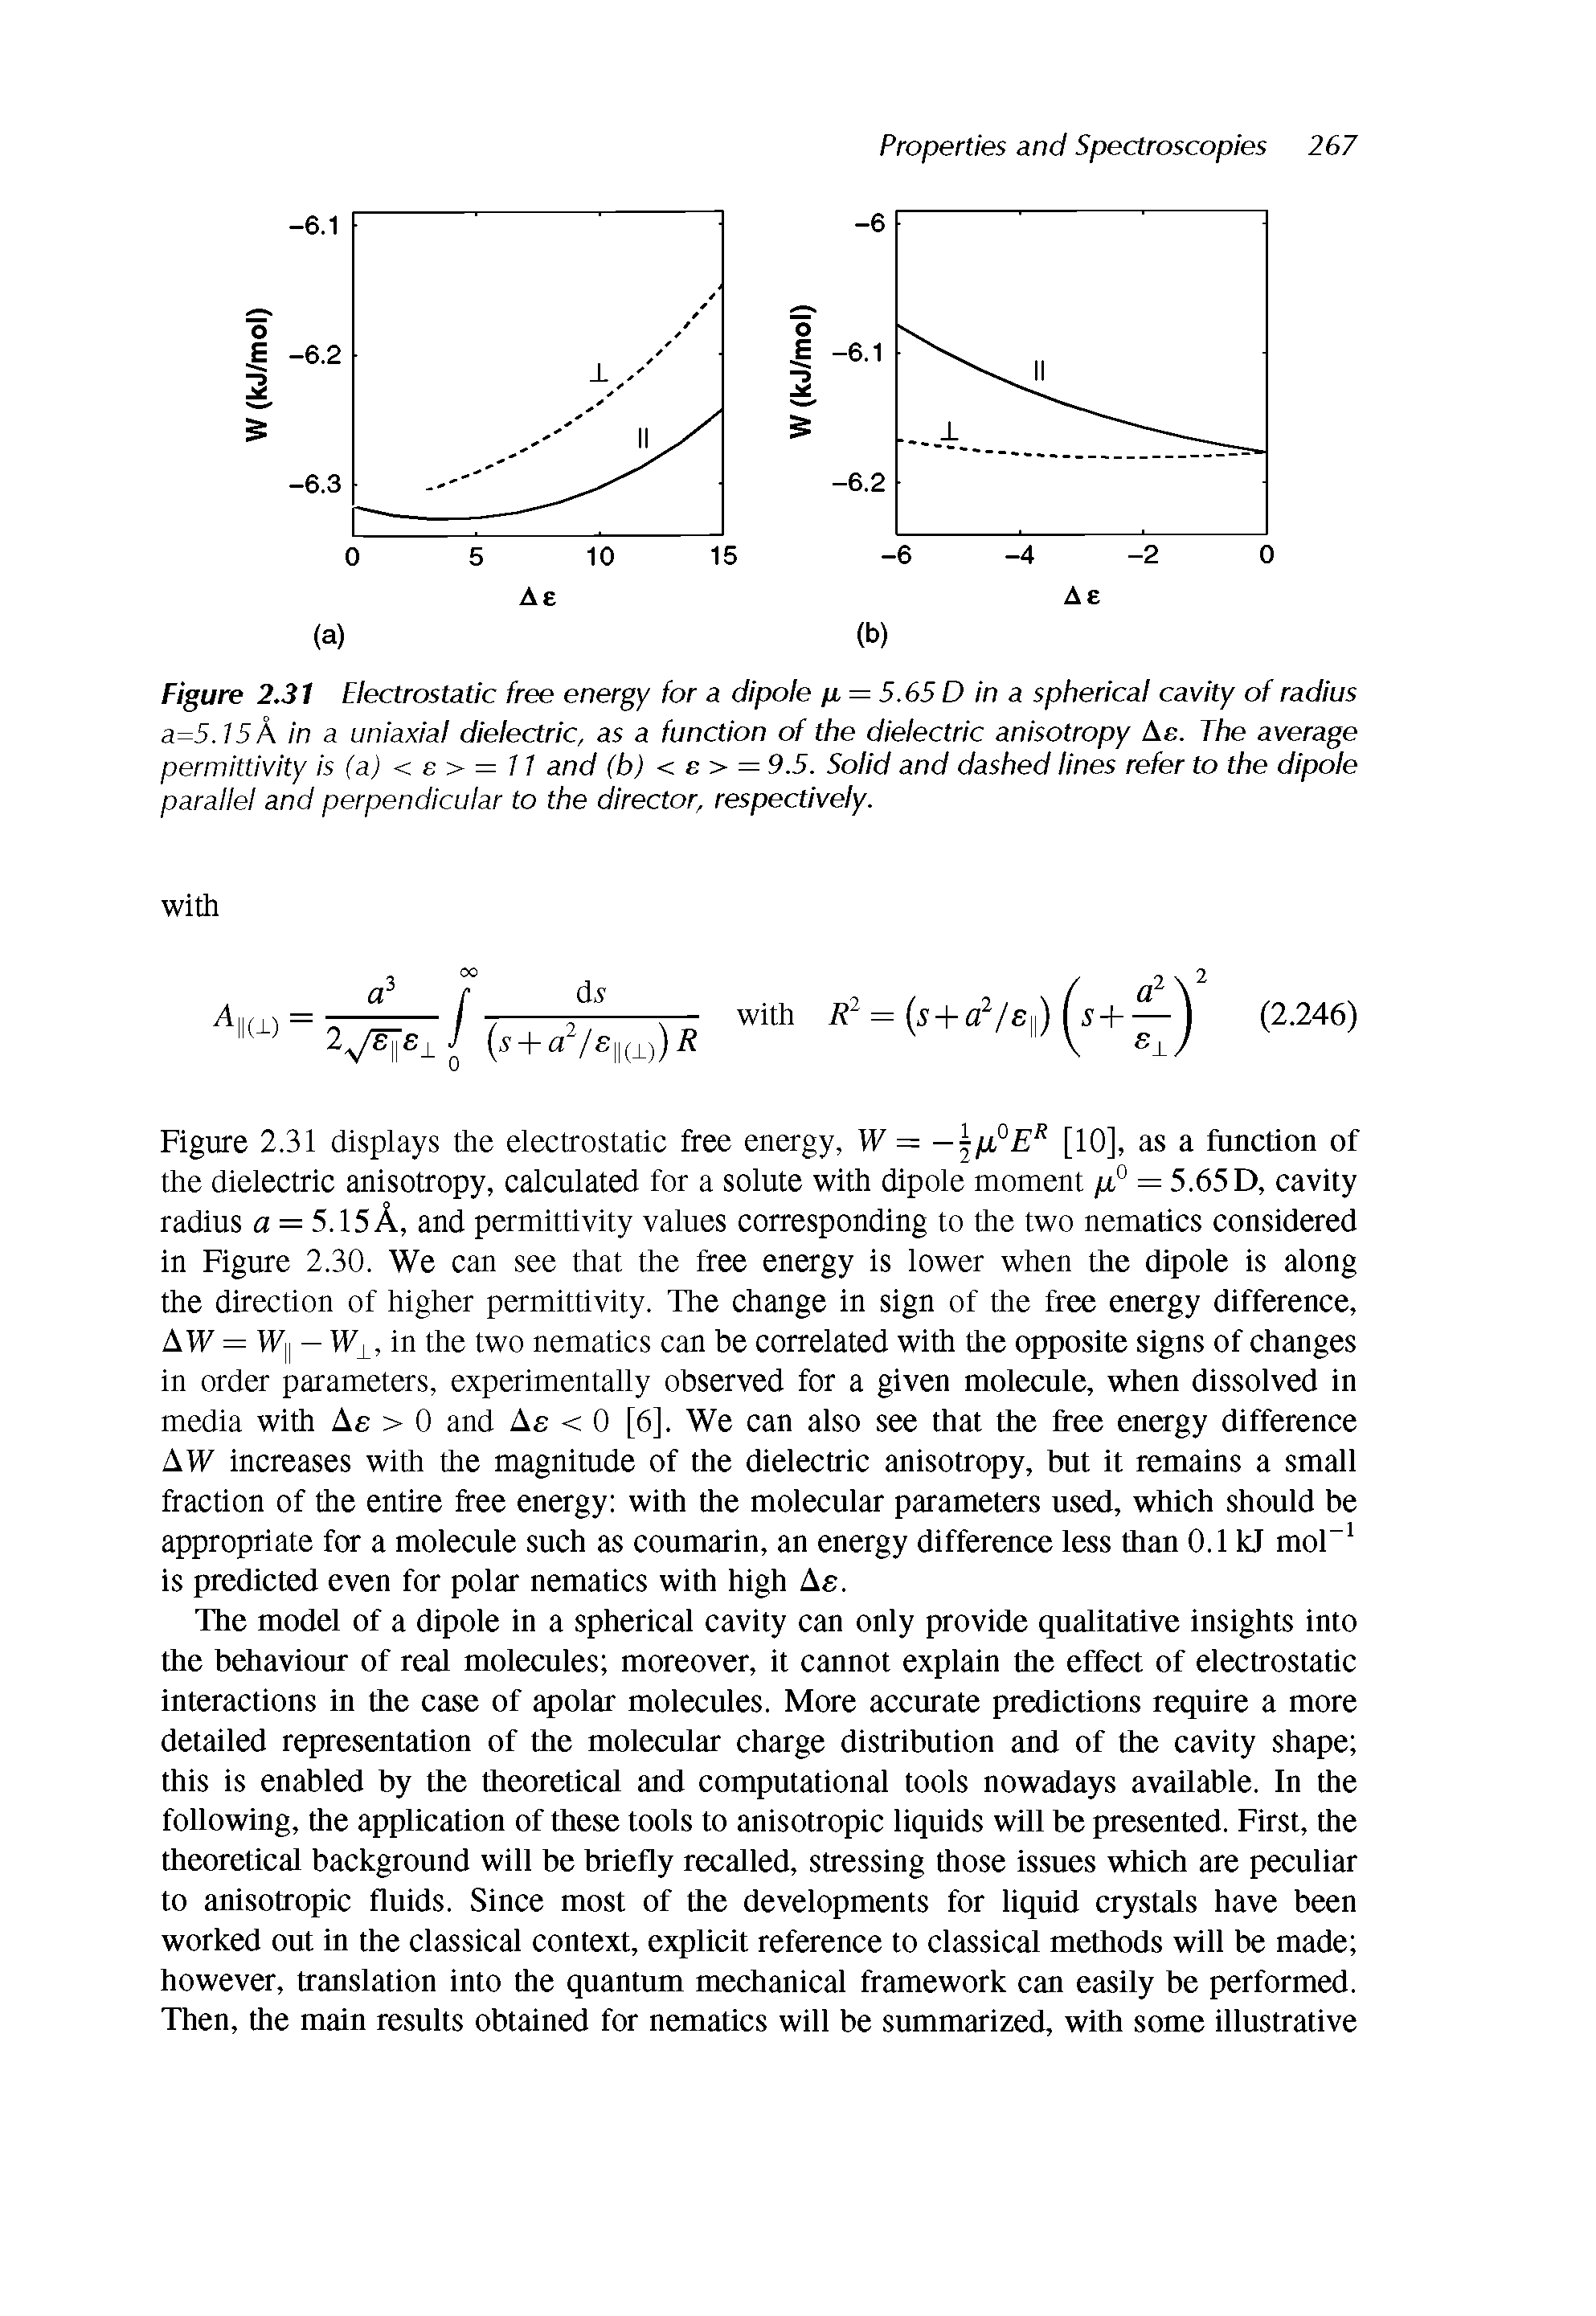 Figure 2.31 Electrostatic free energy for a dipole p = 5.65 D in a spherical cavity of radius a=5. 5 A in a uniaxial dielectric, as a function of the dielectric anisotropy Ae. The average permittivity is (a) < e > = 11 and (b) < e > = 9.5. Solid and dashed lines refer to the dipole parallel and perpendicular to the director, respectively.